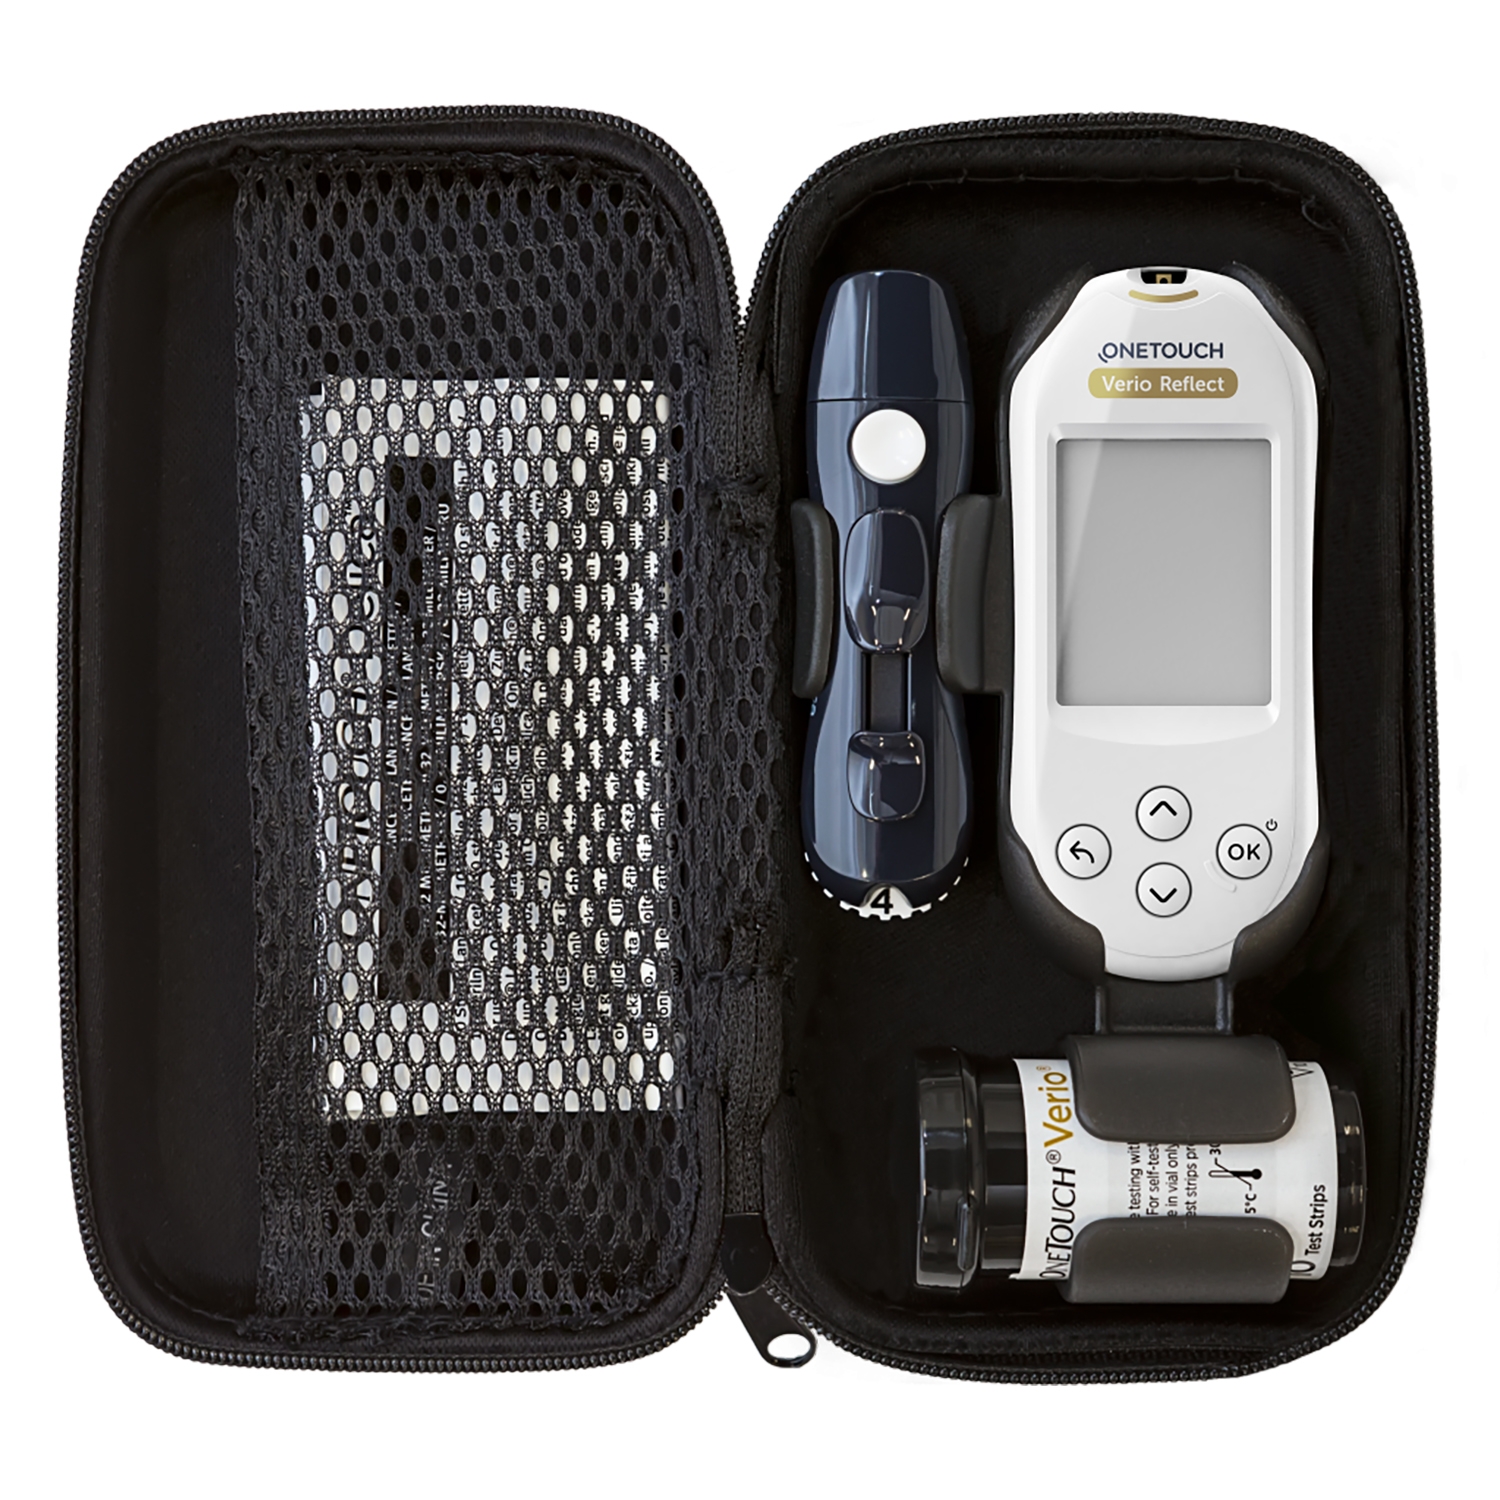 One touch Verio reflect glucometer startkit